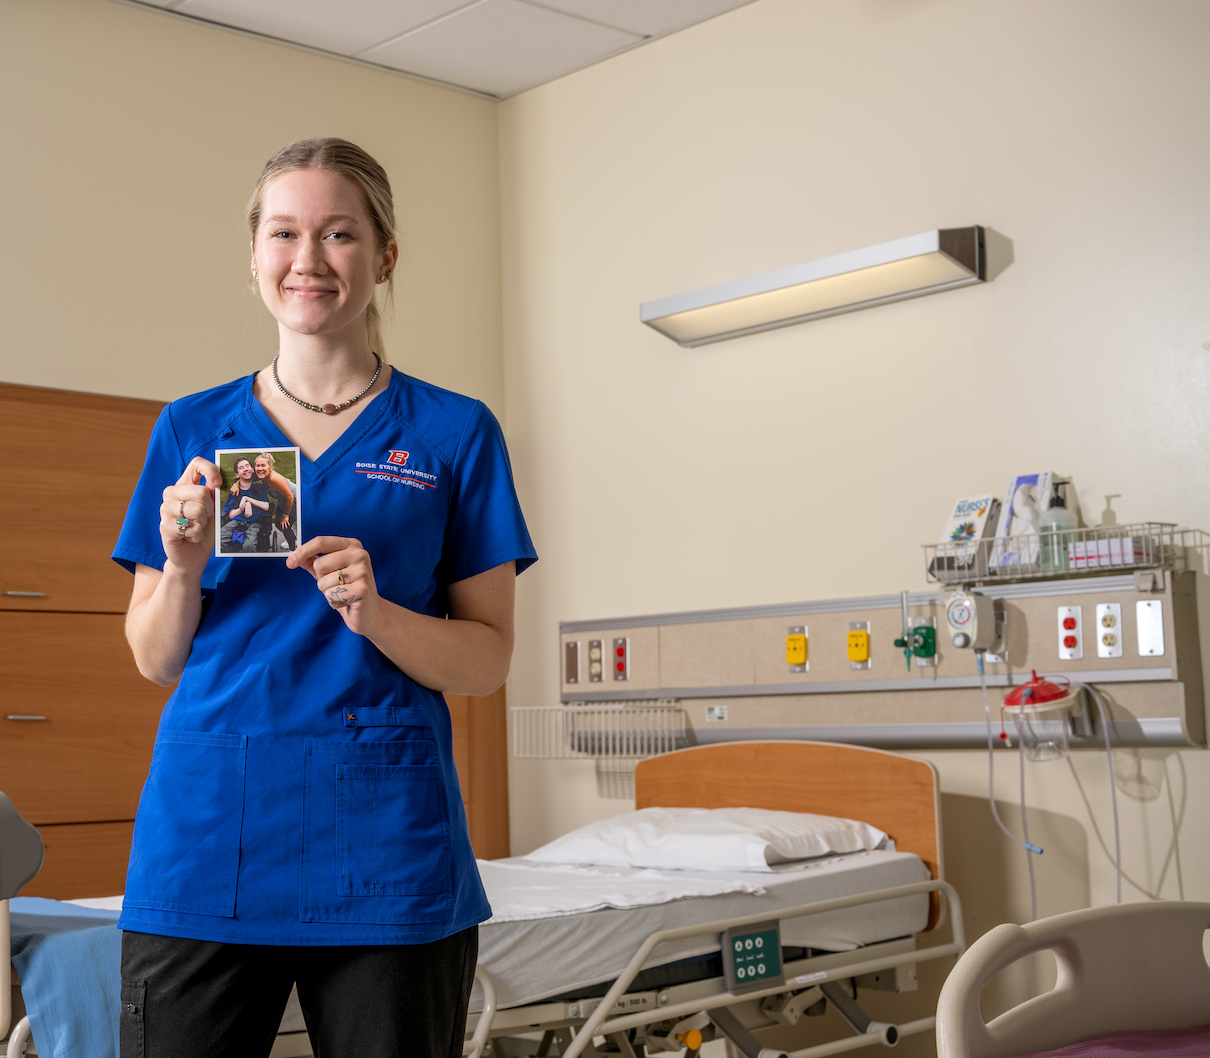 Nursing students serve campus, gain real-world experience - Boise